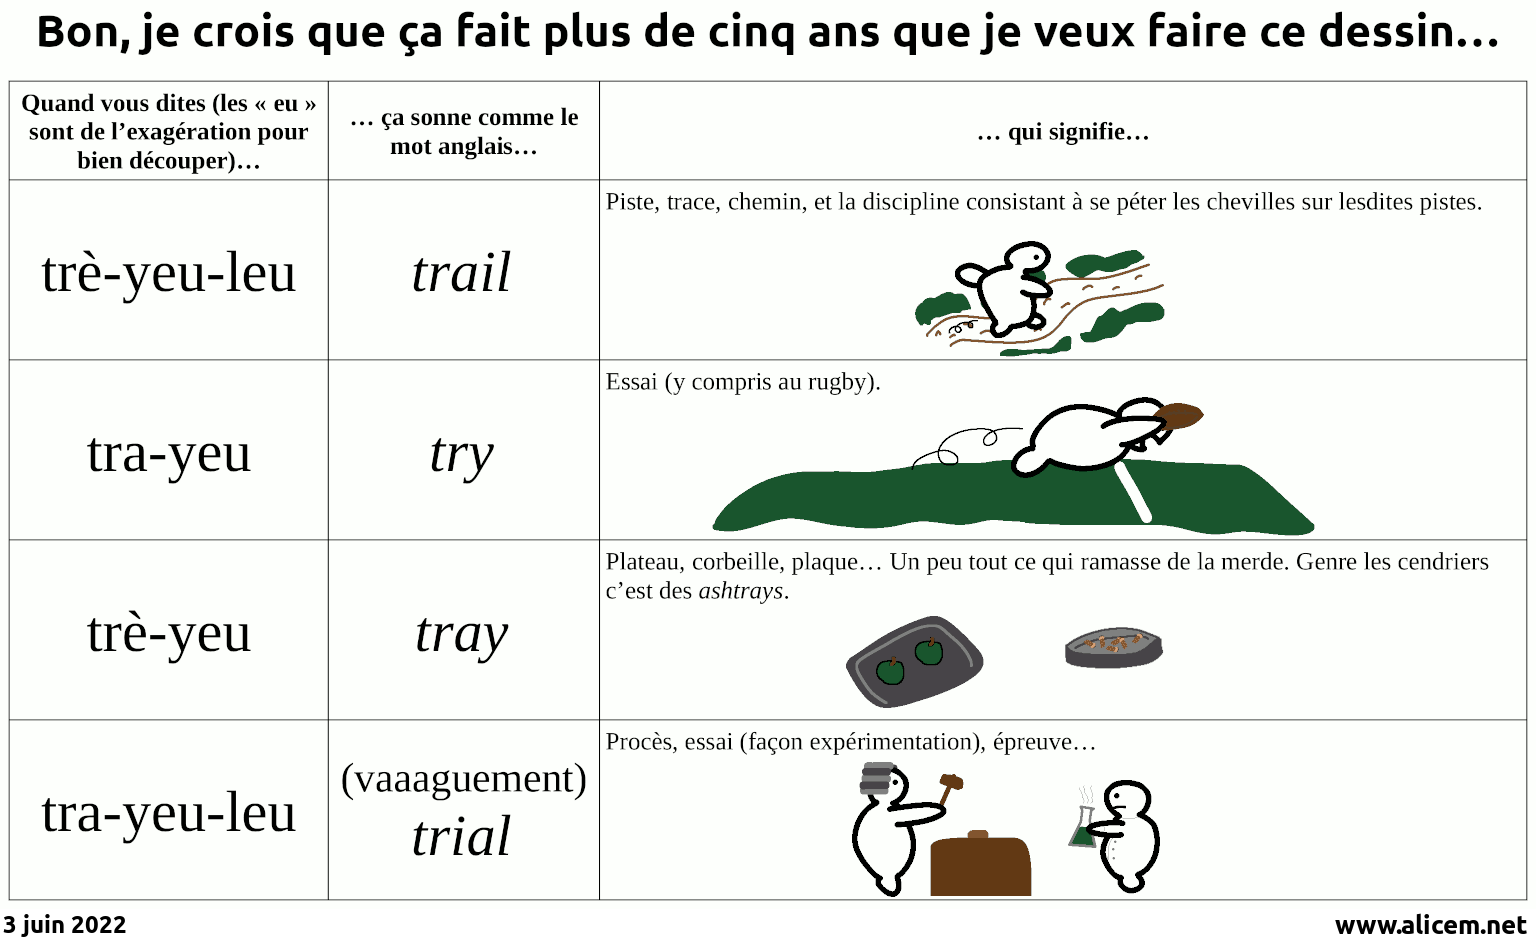 trail_try_tray_trial.png